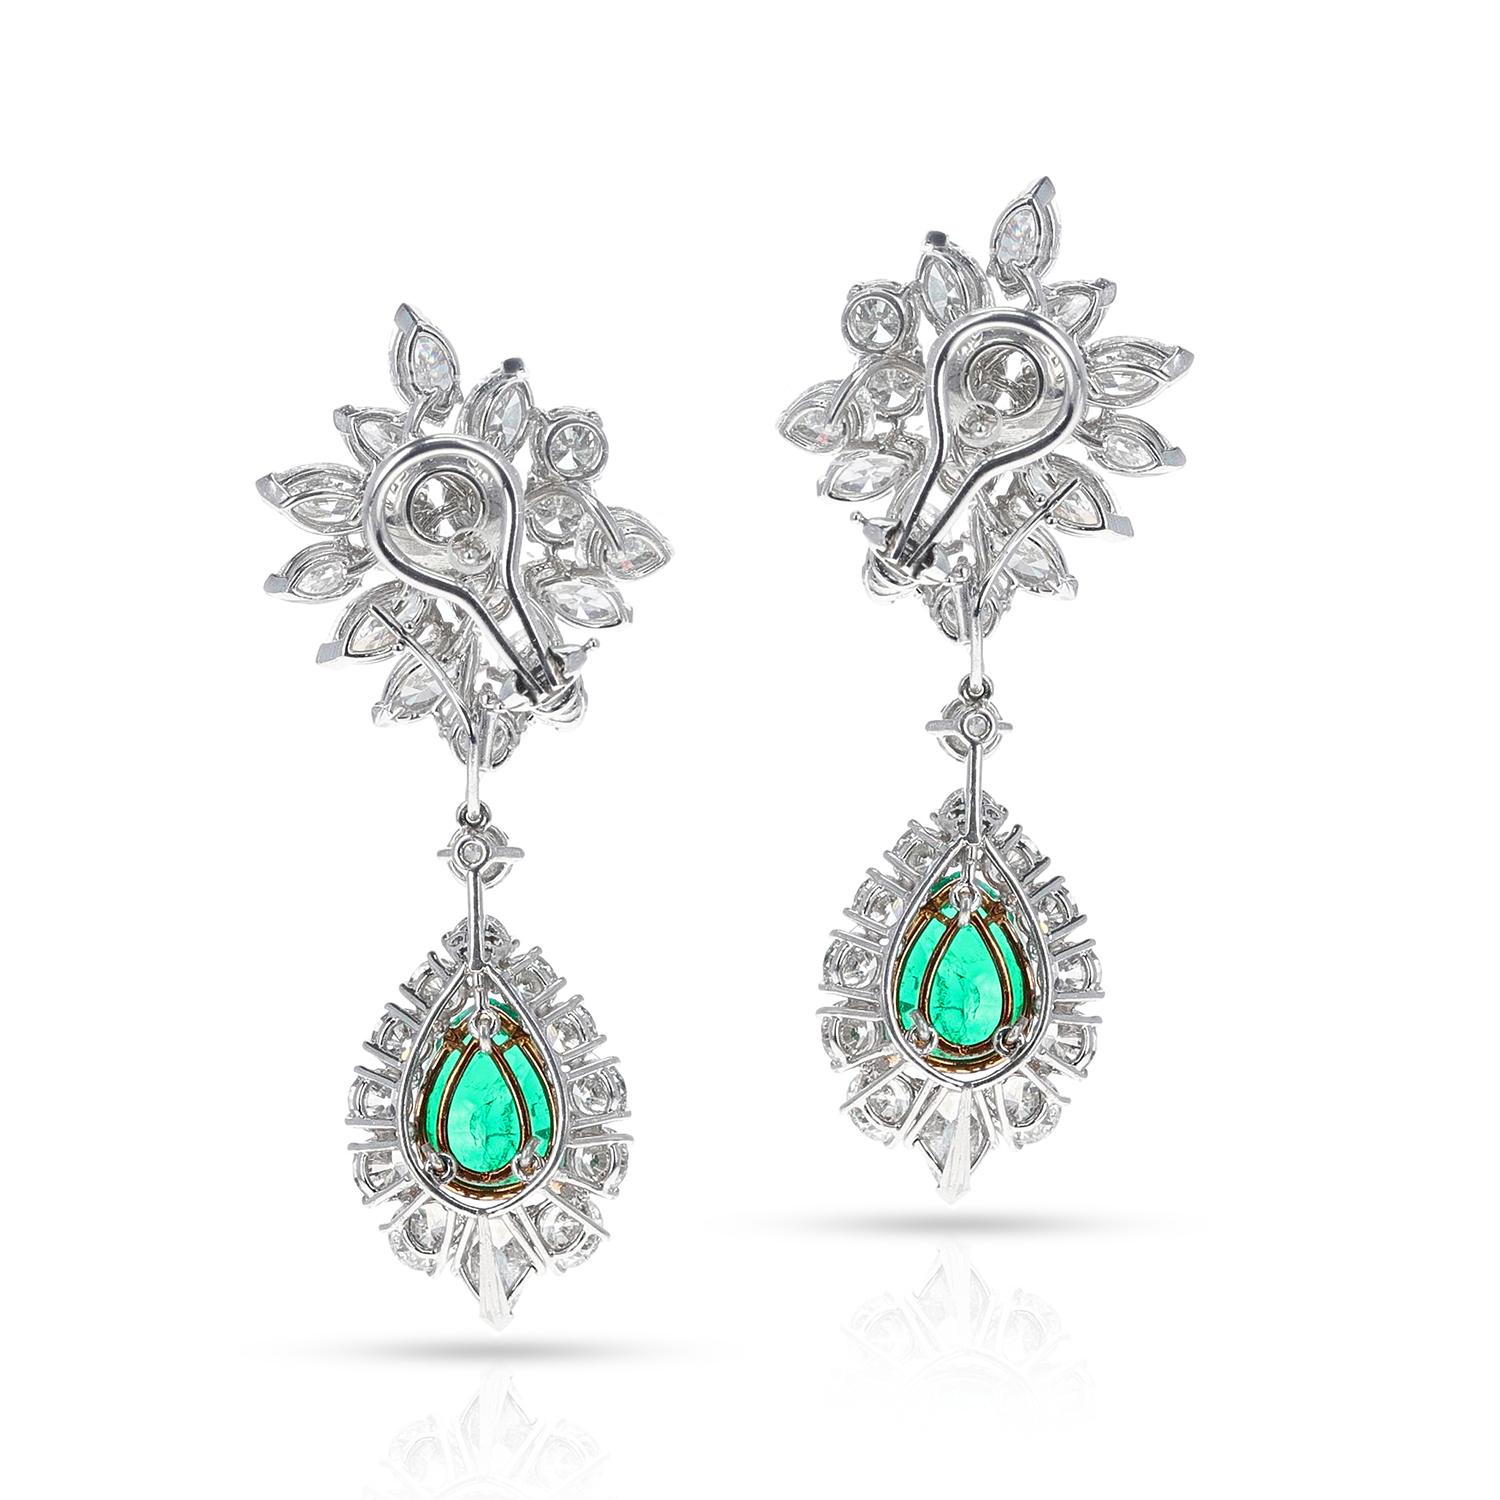 A pair of Van Cleef & Arpels AGL Certified Colombian Emerald and Diamond Day and Night Earrings made in Platinum. The pear-shaped mixed-cut emeralds weigh appx. 2.75 cts and 3.30 cts. The diamonds, round brilliant-cut, pear-shape, and marquise-cut